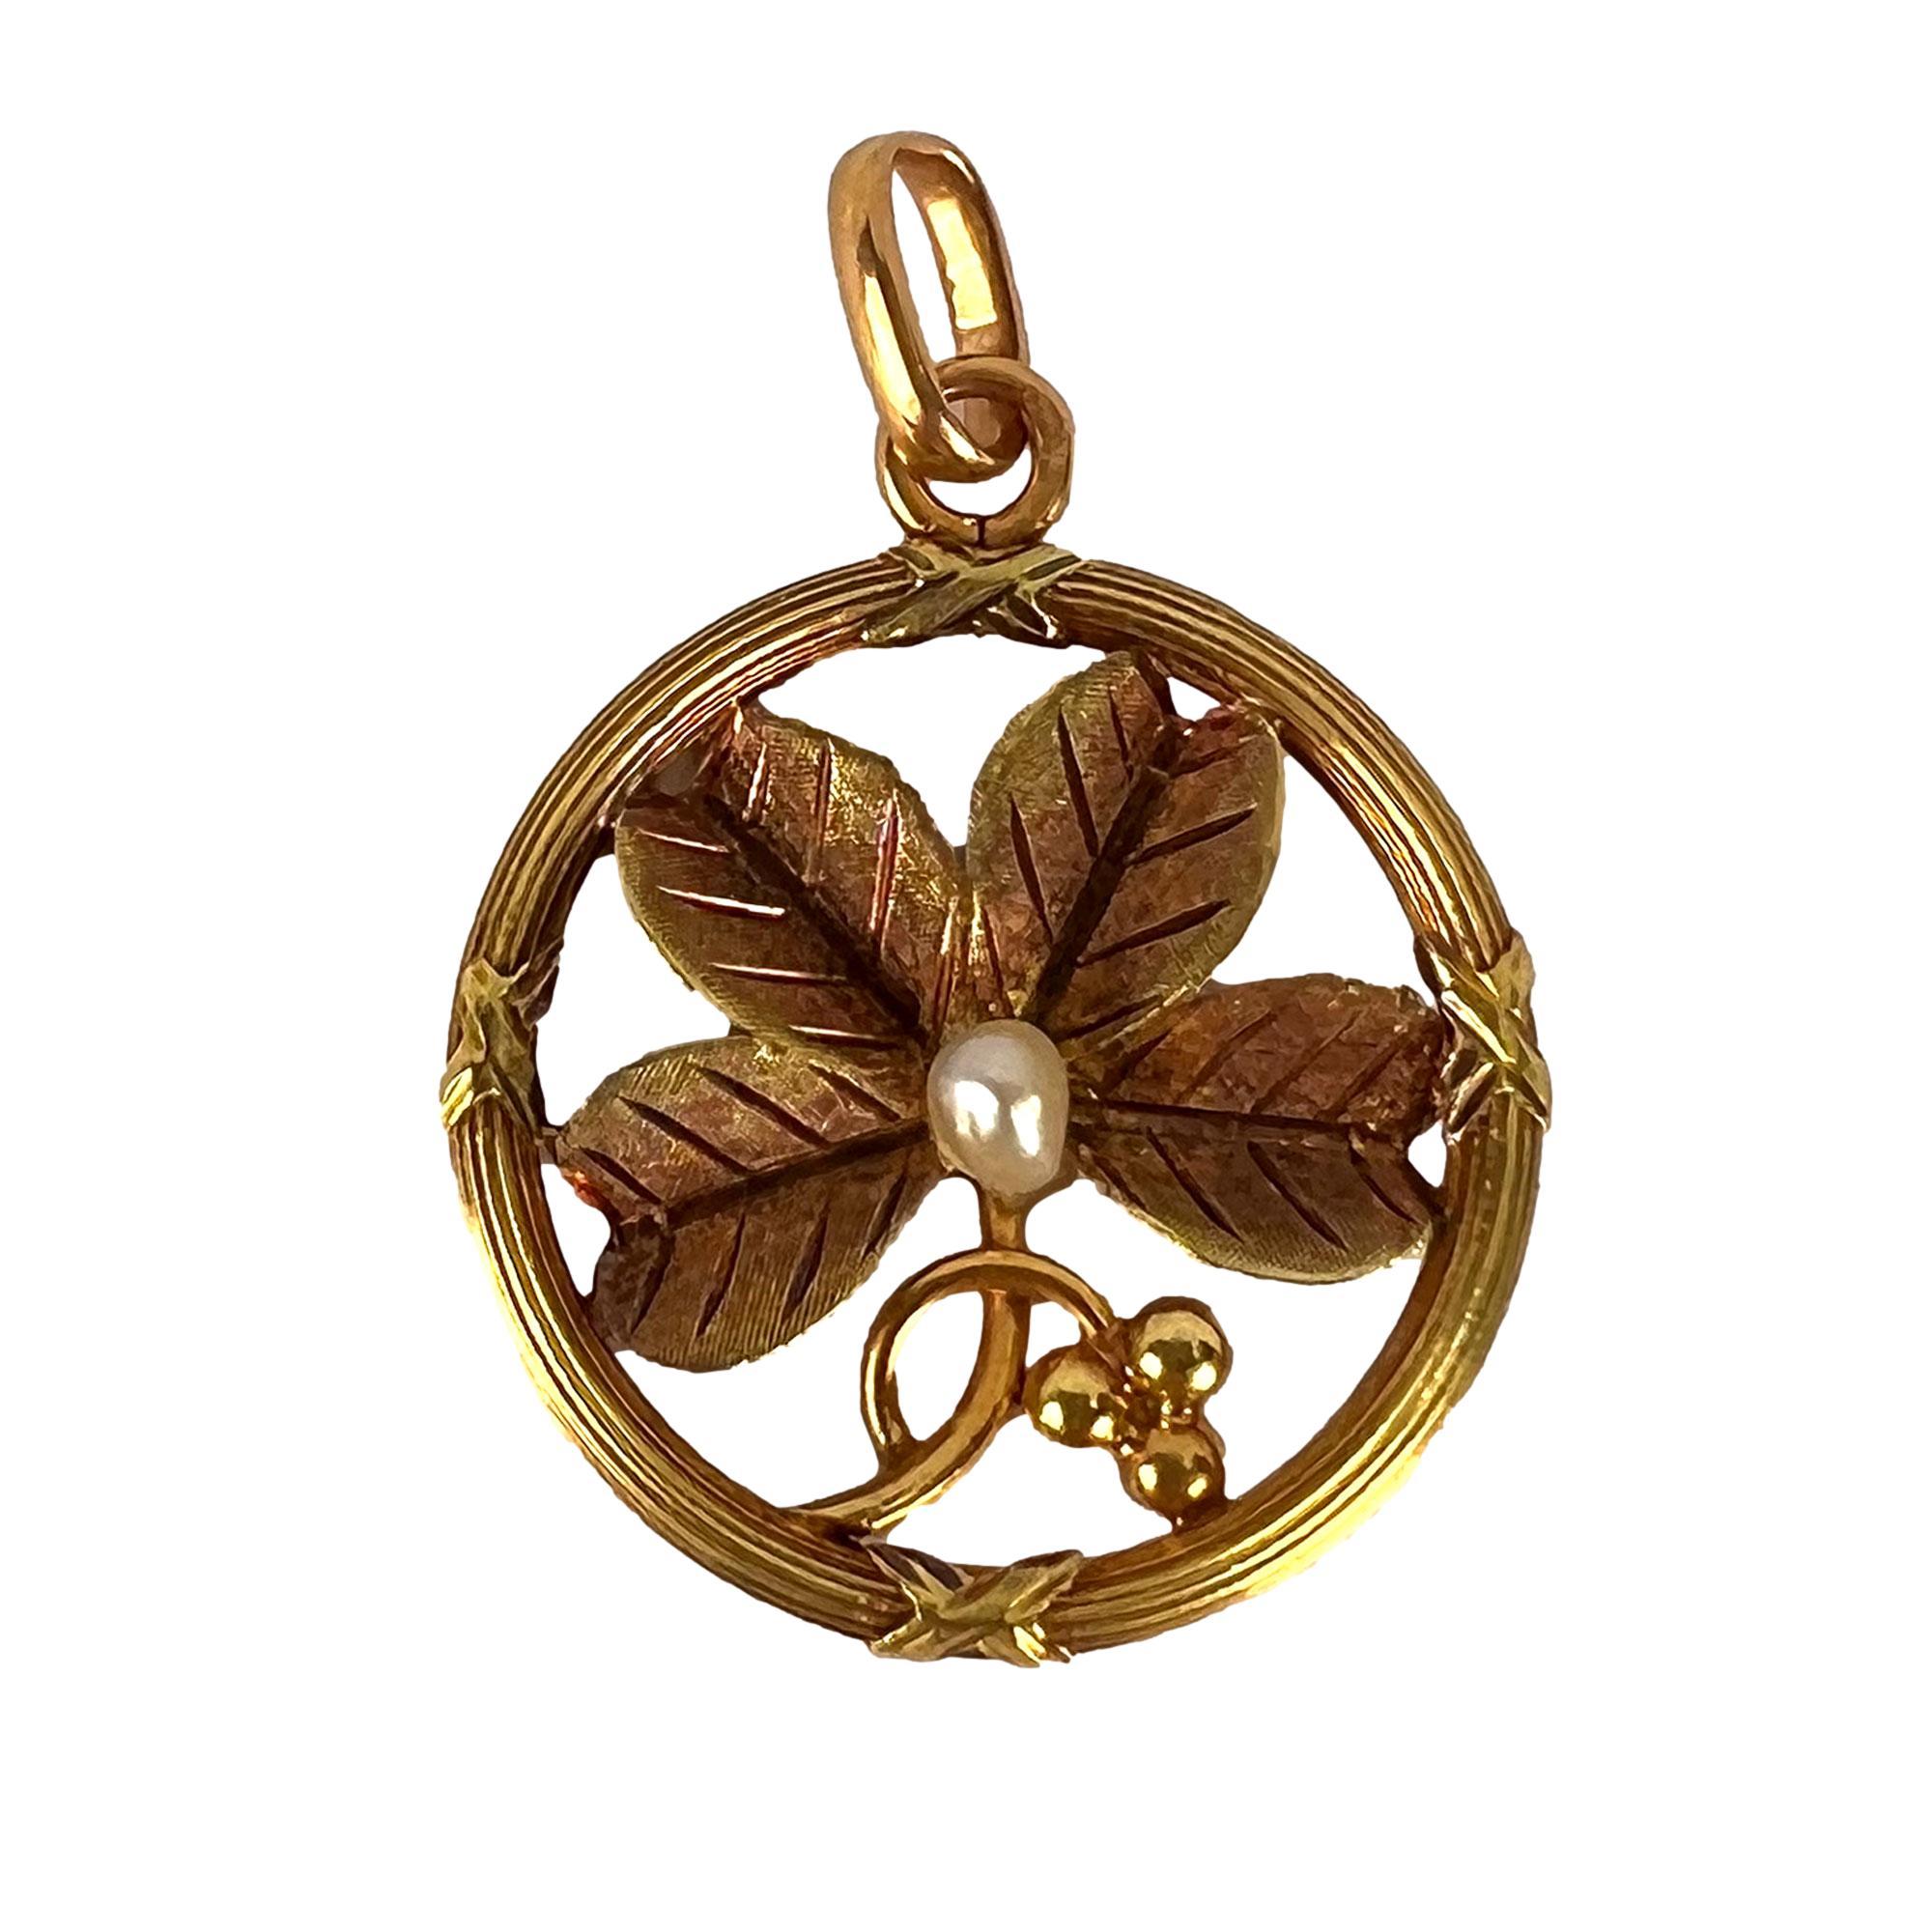 An 18 karat (18K) yellow gold charm pendant designed as a four-leaf clover or shamrock with a natural pearl centre within a reeded circular frame. Stamped with the eagle’s head for French manufacture and 18 karat gold.

Dimensions: 2.5 x 2.1 x 0.25